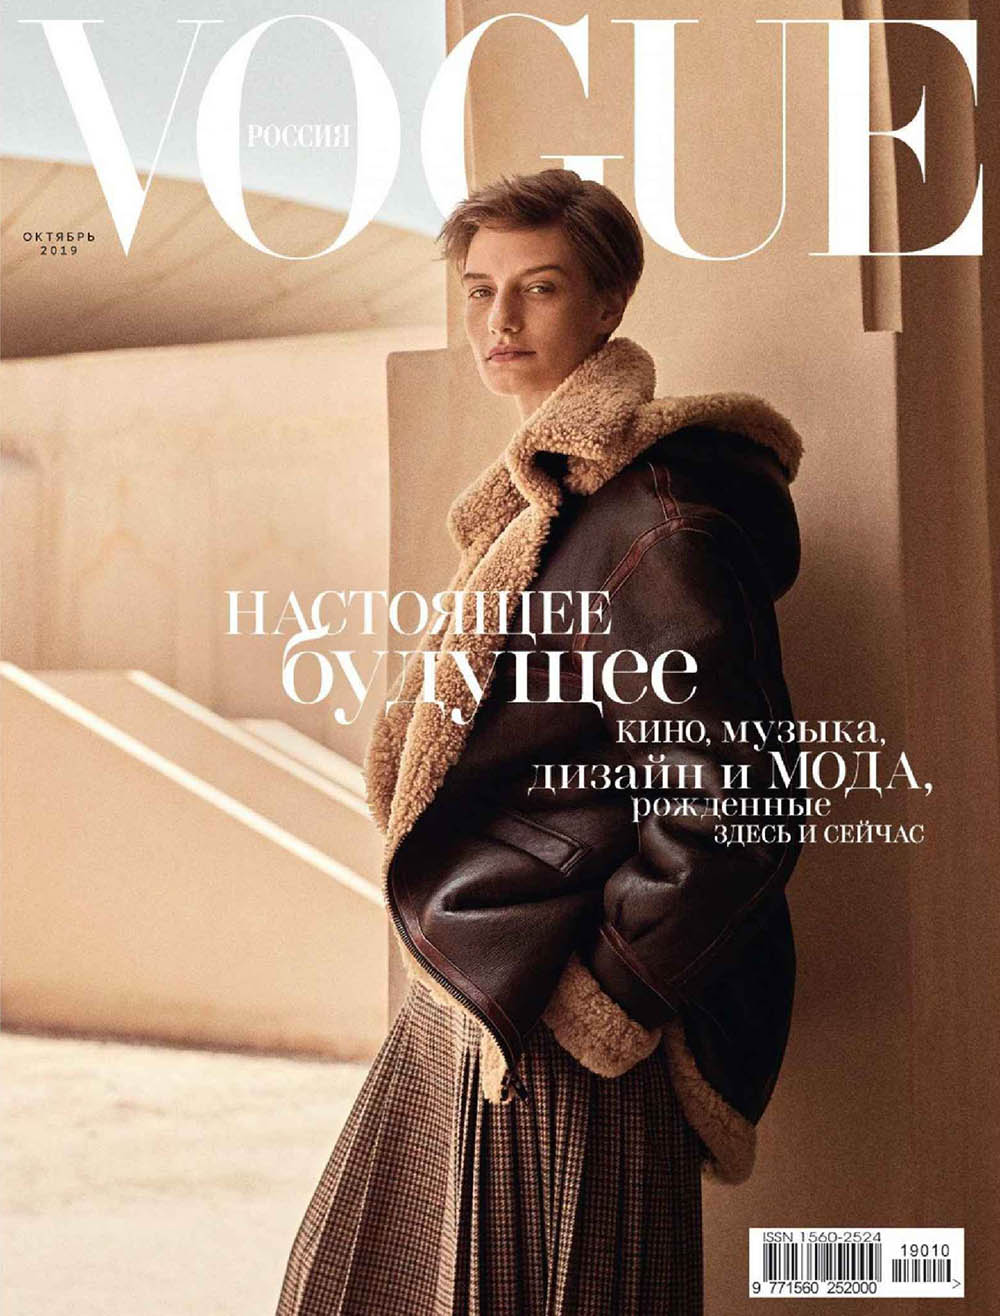 Veronika Kunz covers Vogue Russia October 2019 by Giampaolo Sgura